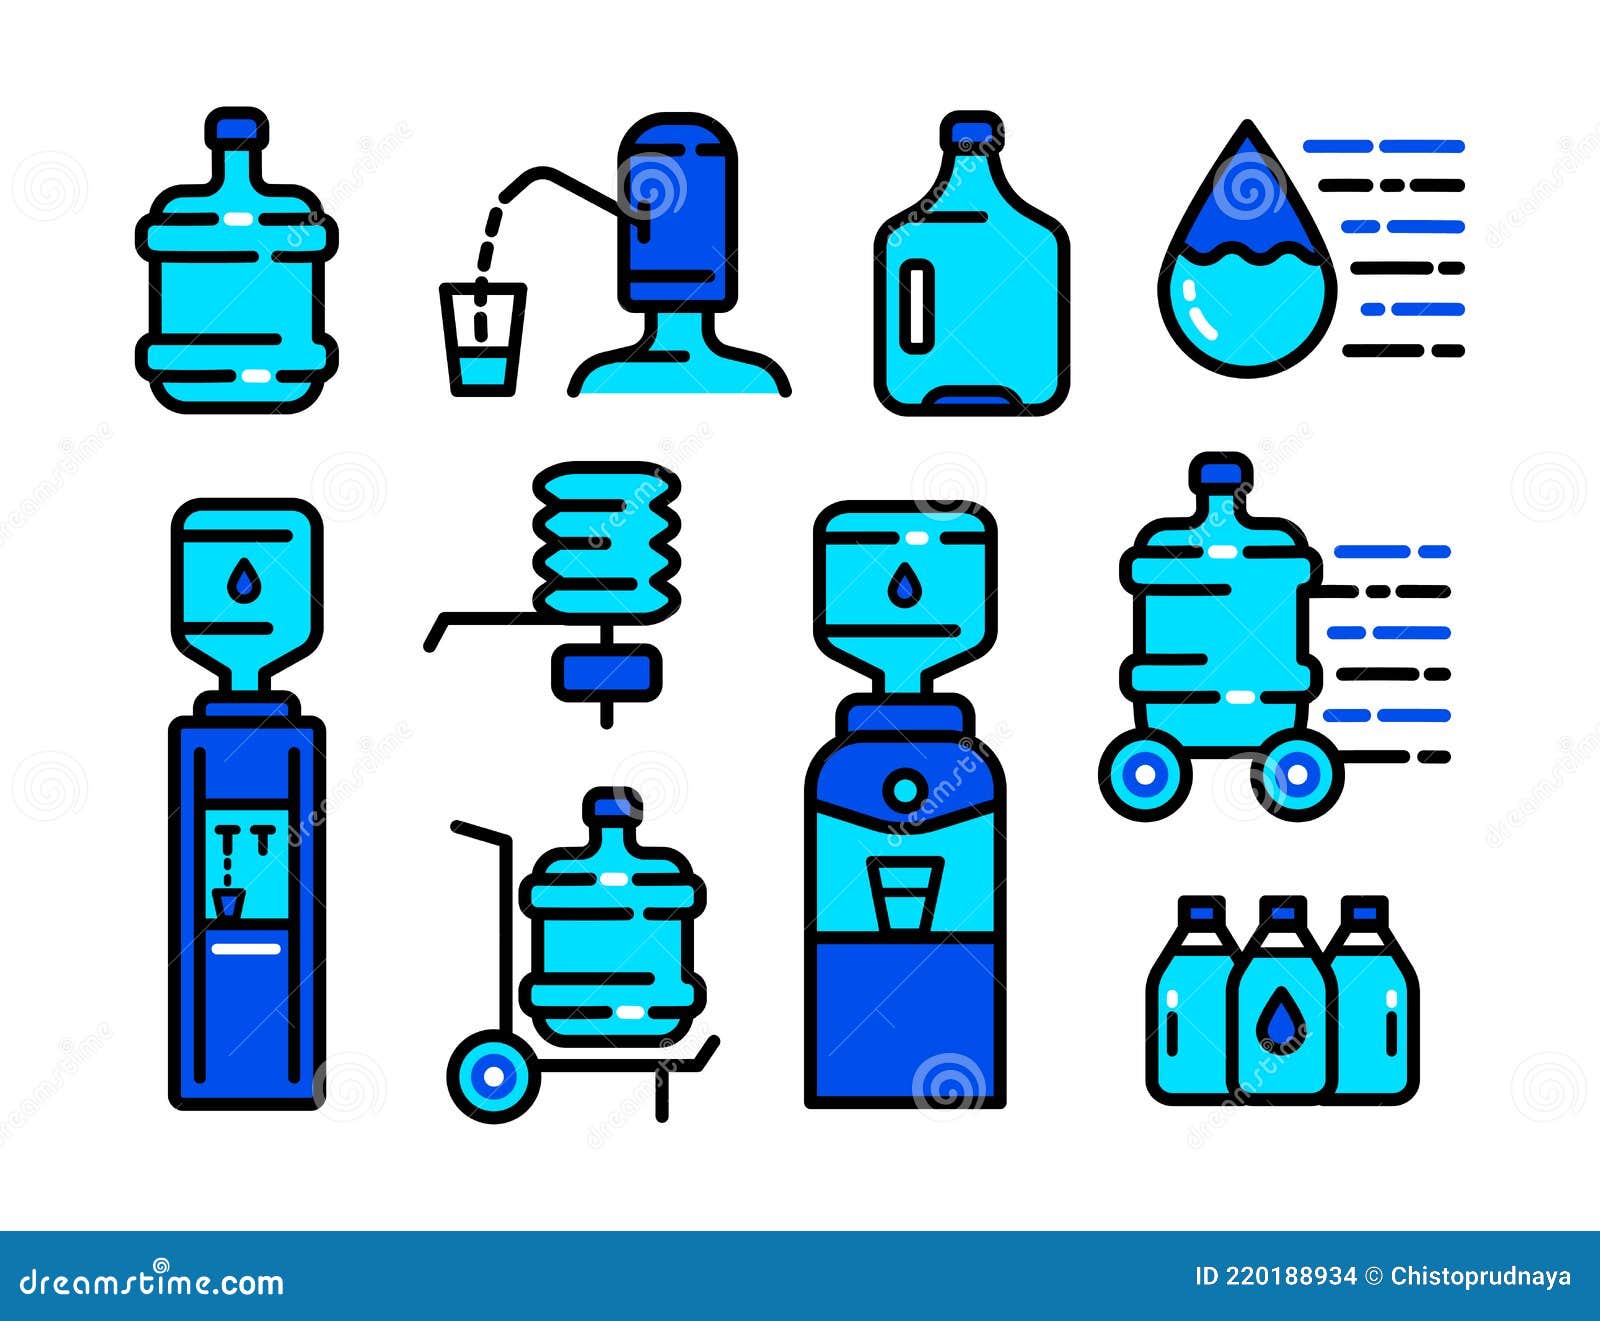 Water Cooler Simple Style Icon Set Stock Vector - Illustration of drop ...